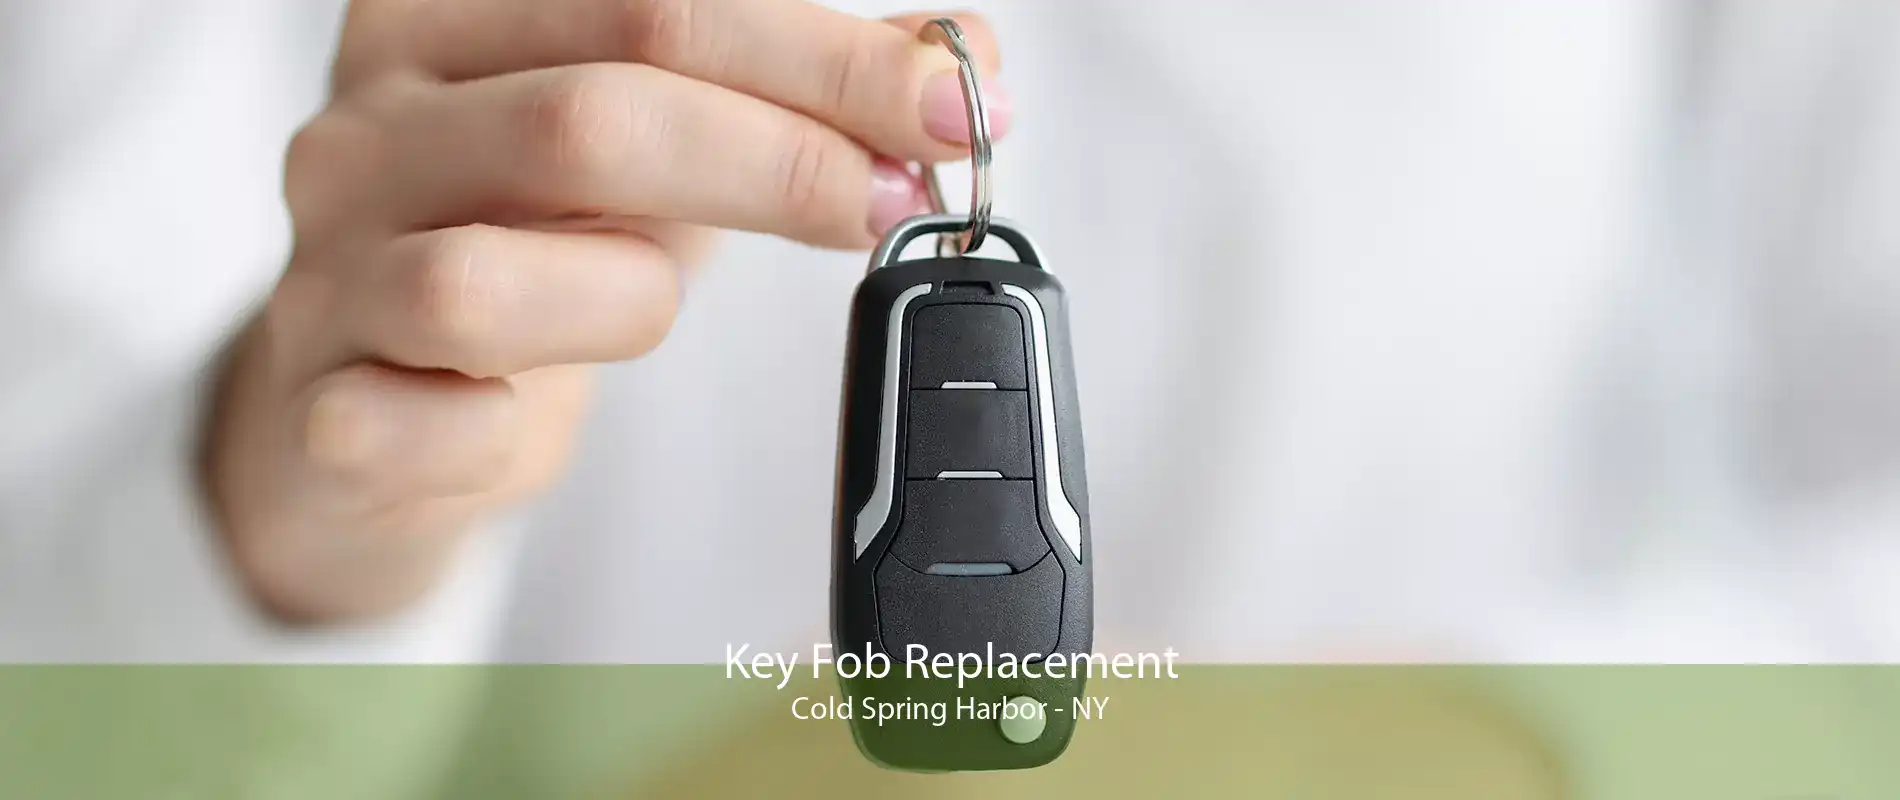 Key Fob Replacement Cold Spring Harbor - NY